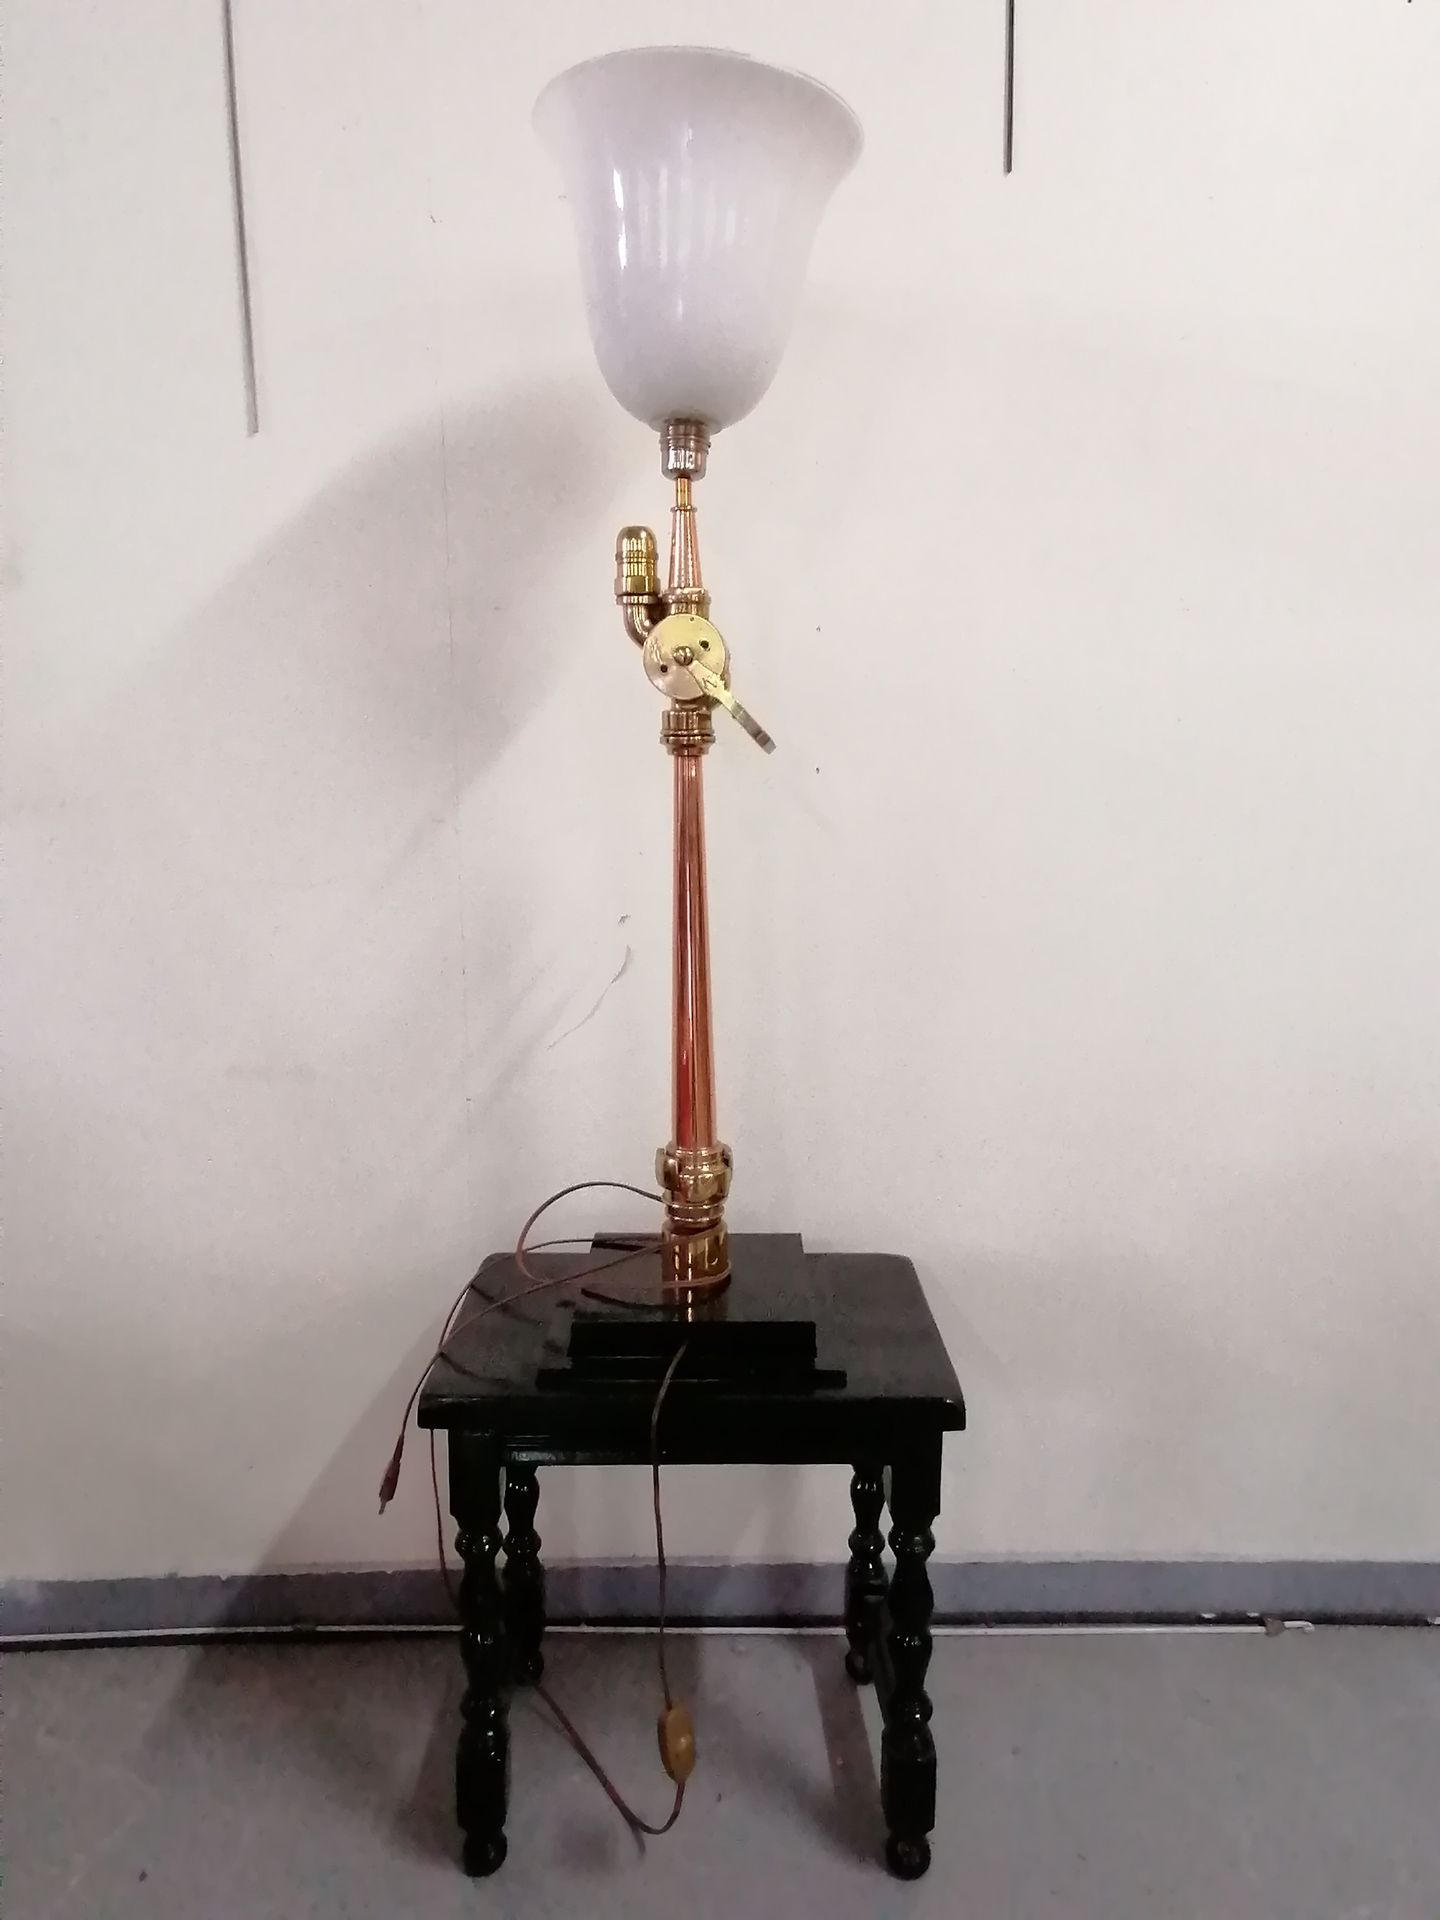 Null Curious LAMPADAIRE

made of an old copper and brass fire hose mounted on a &hellip;